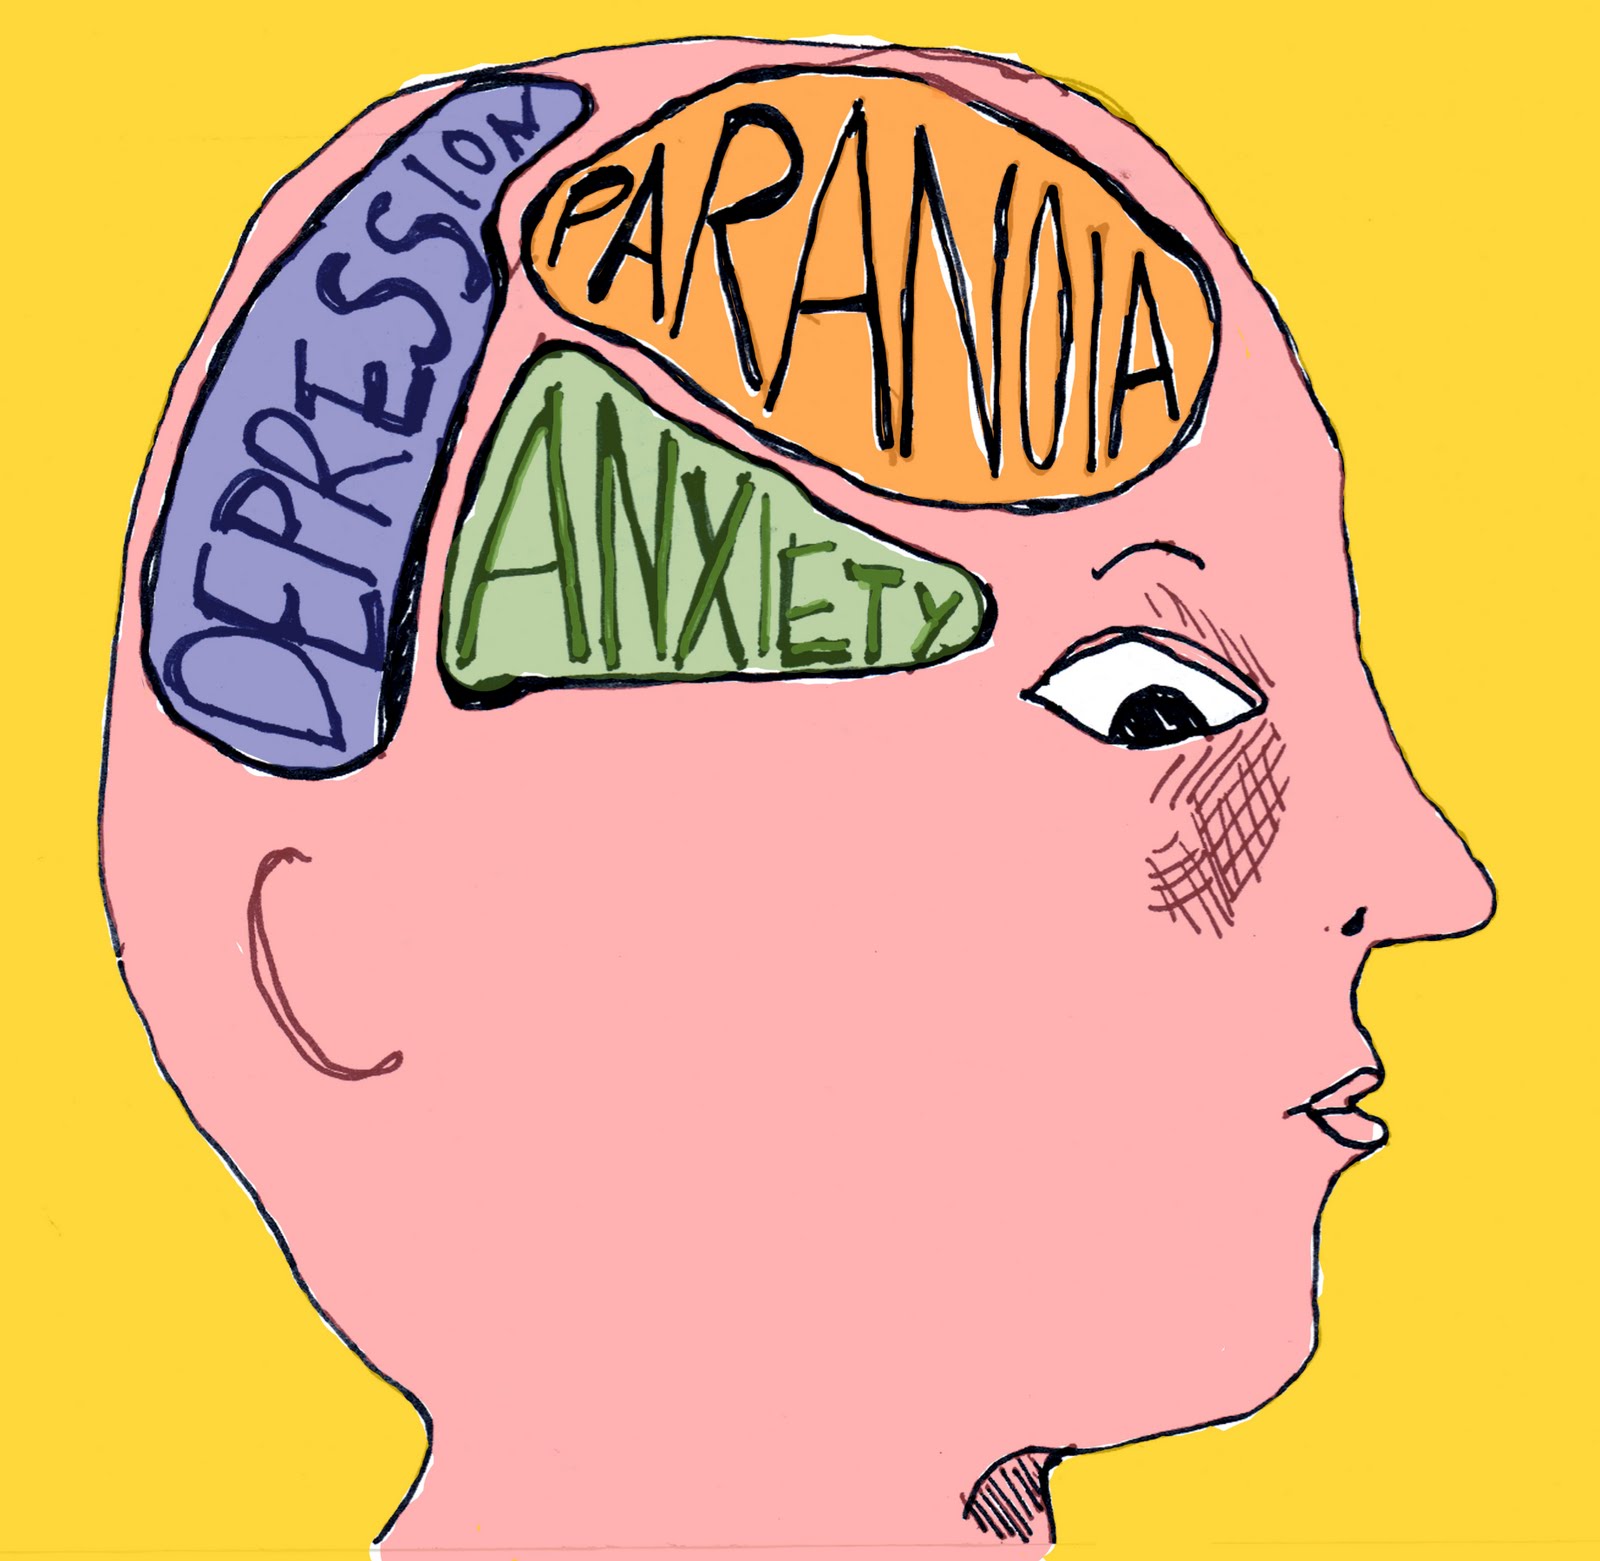 A brain clipart encompassing thoughts of depression, anxiety, and paranoia.